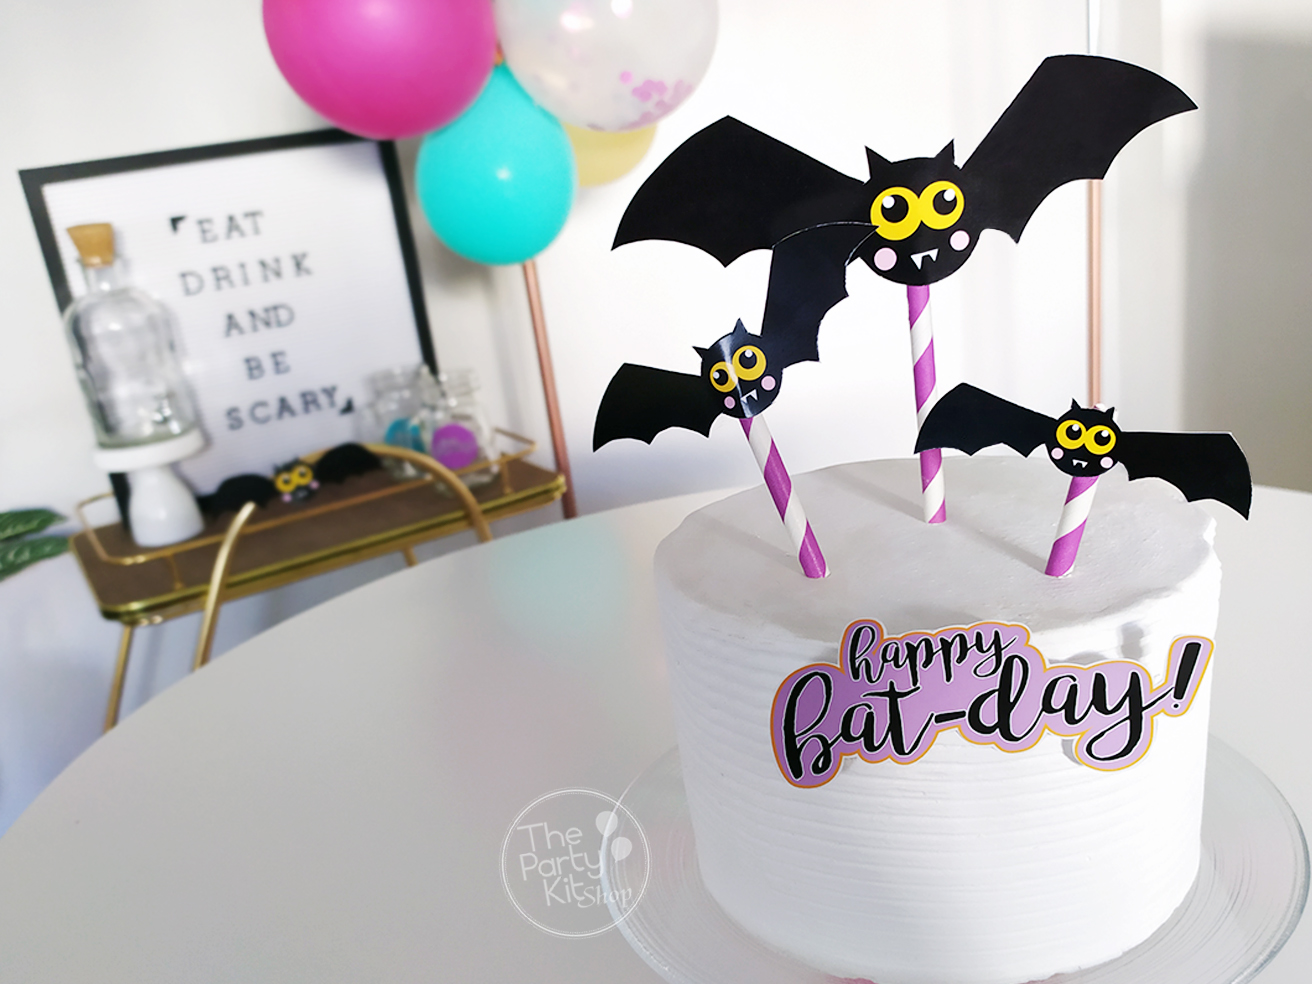 DIY Halloween Straw Toppers + free printables